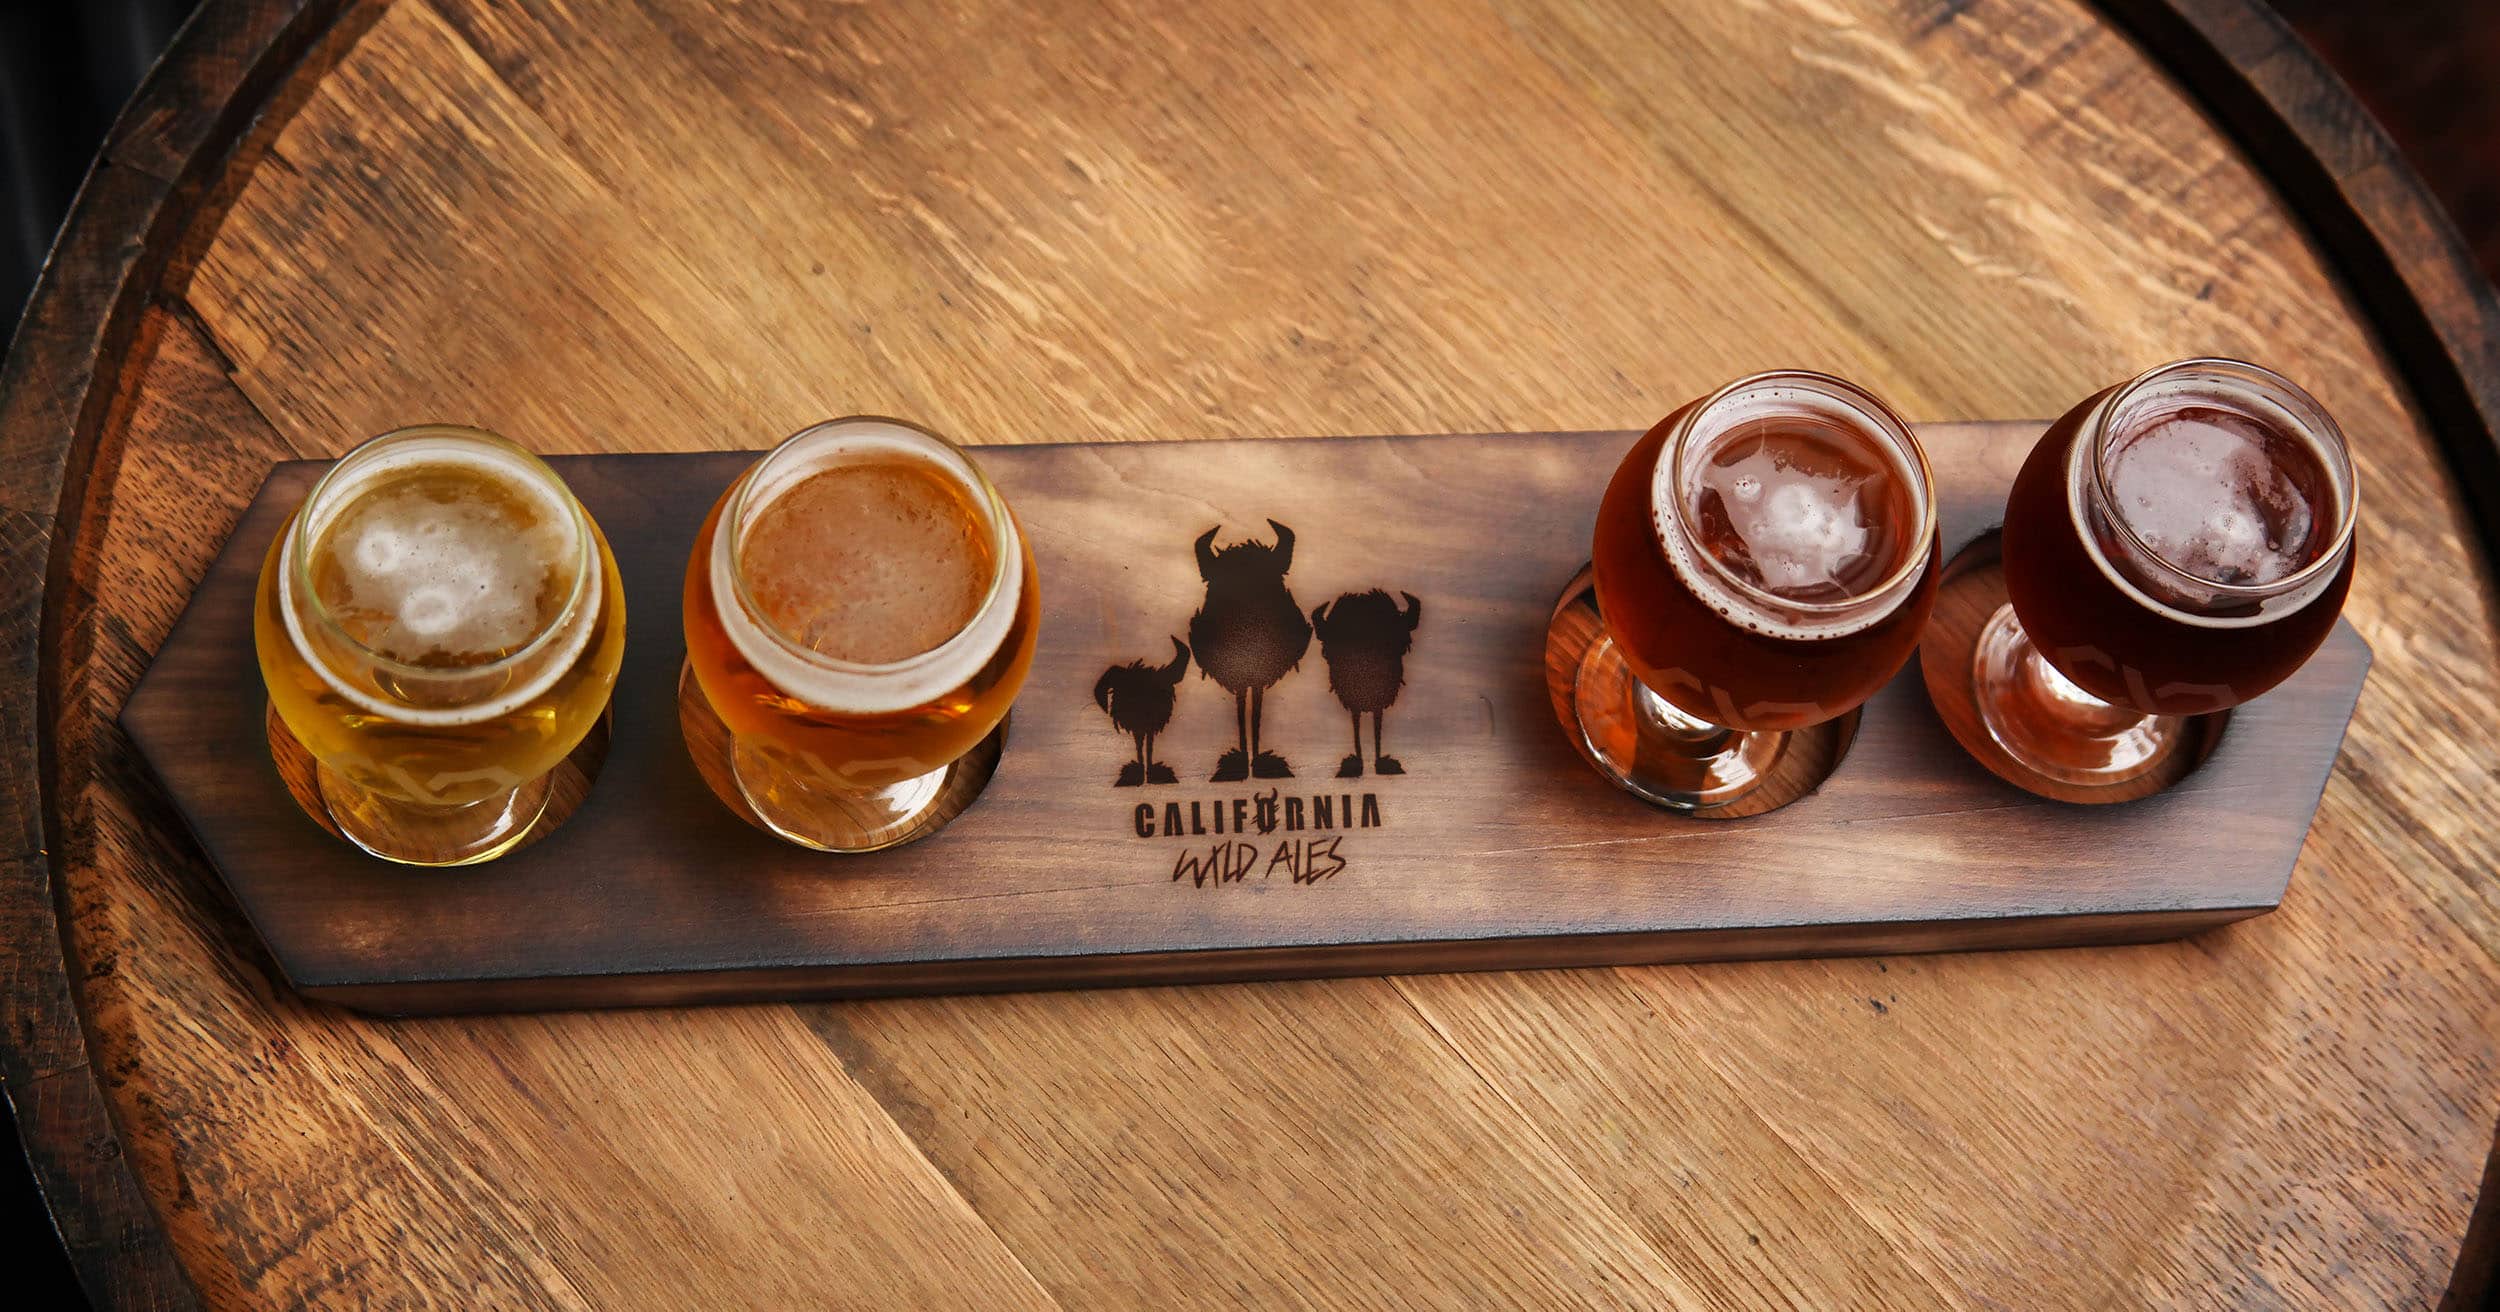 California Wild Ales - More than just sour beer